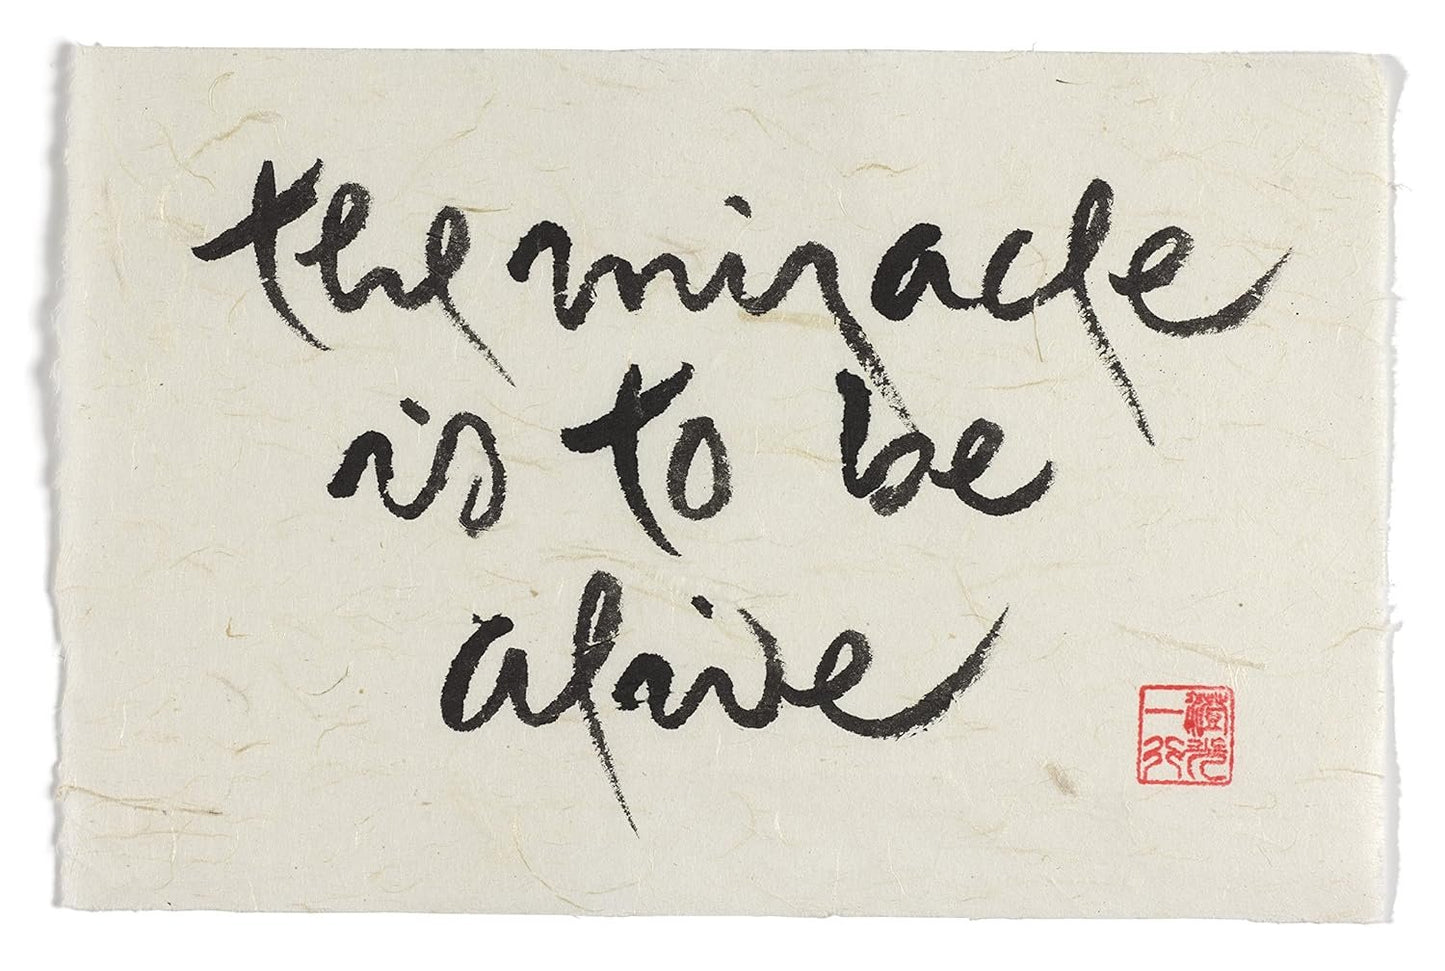 This Moment Is Full of Wonders: The Zen Calligraphy of Thich Nhat Hanh